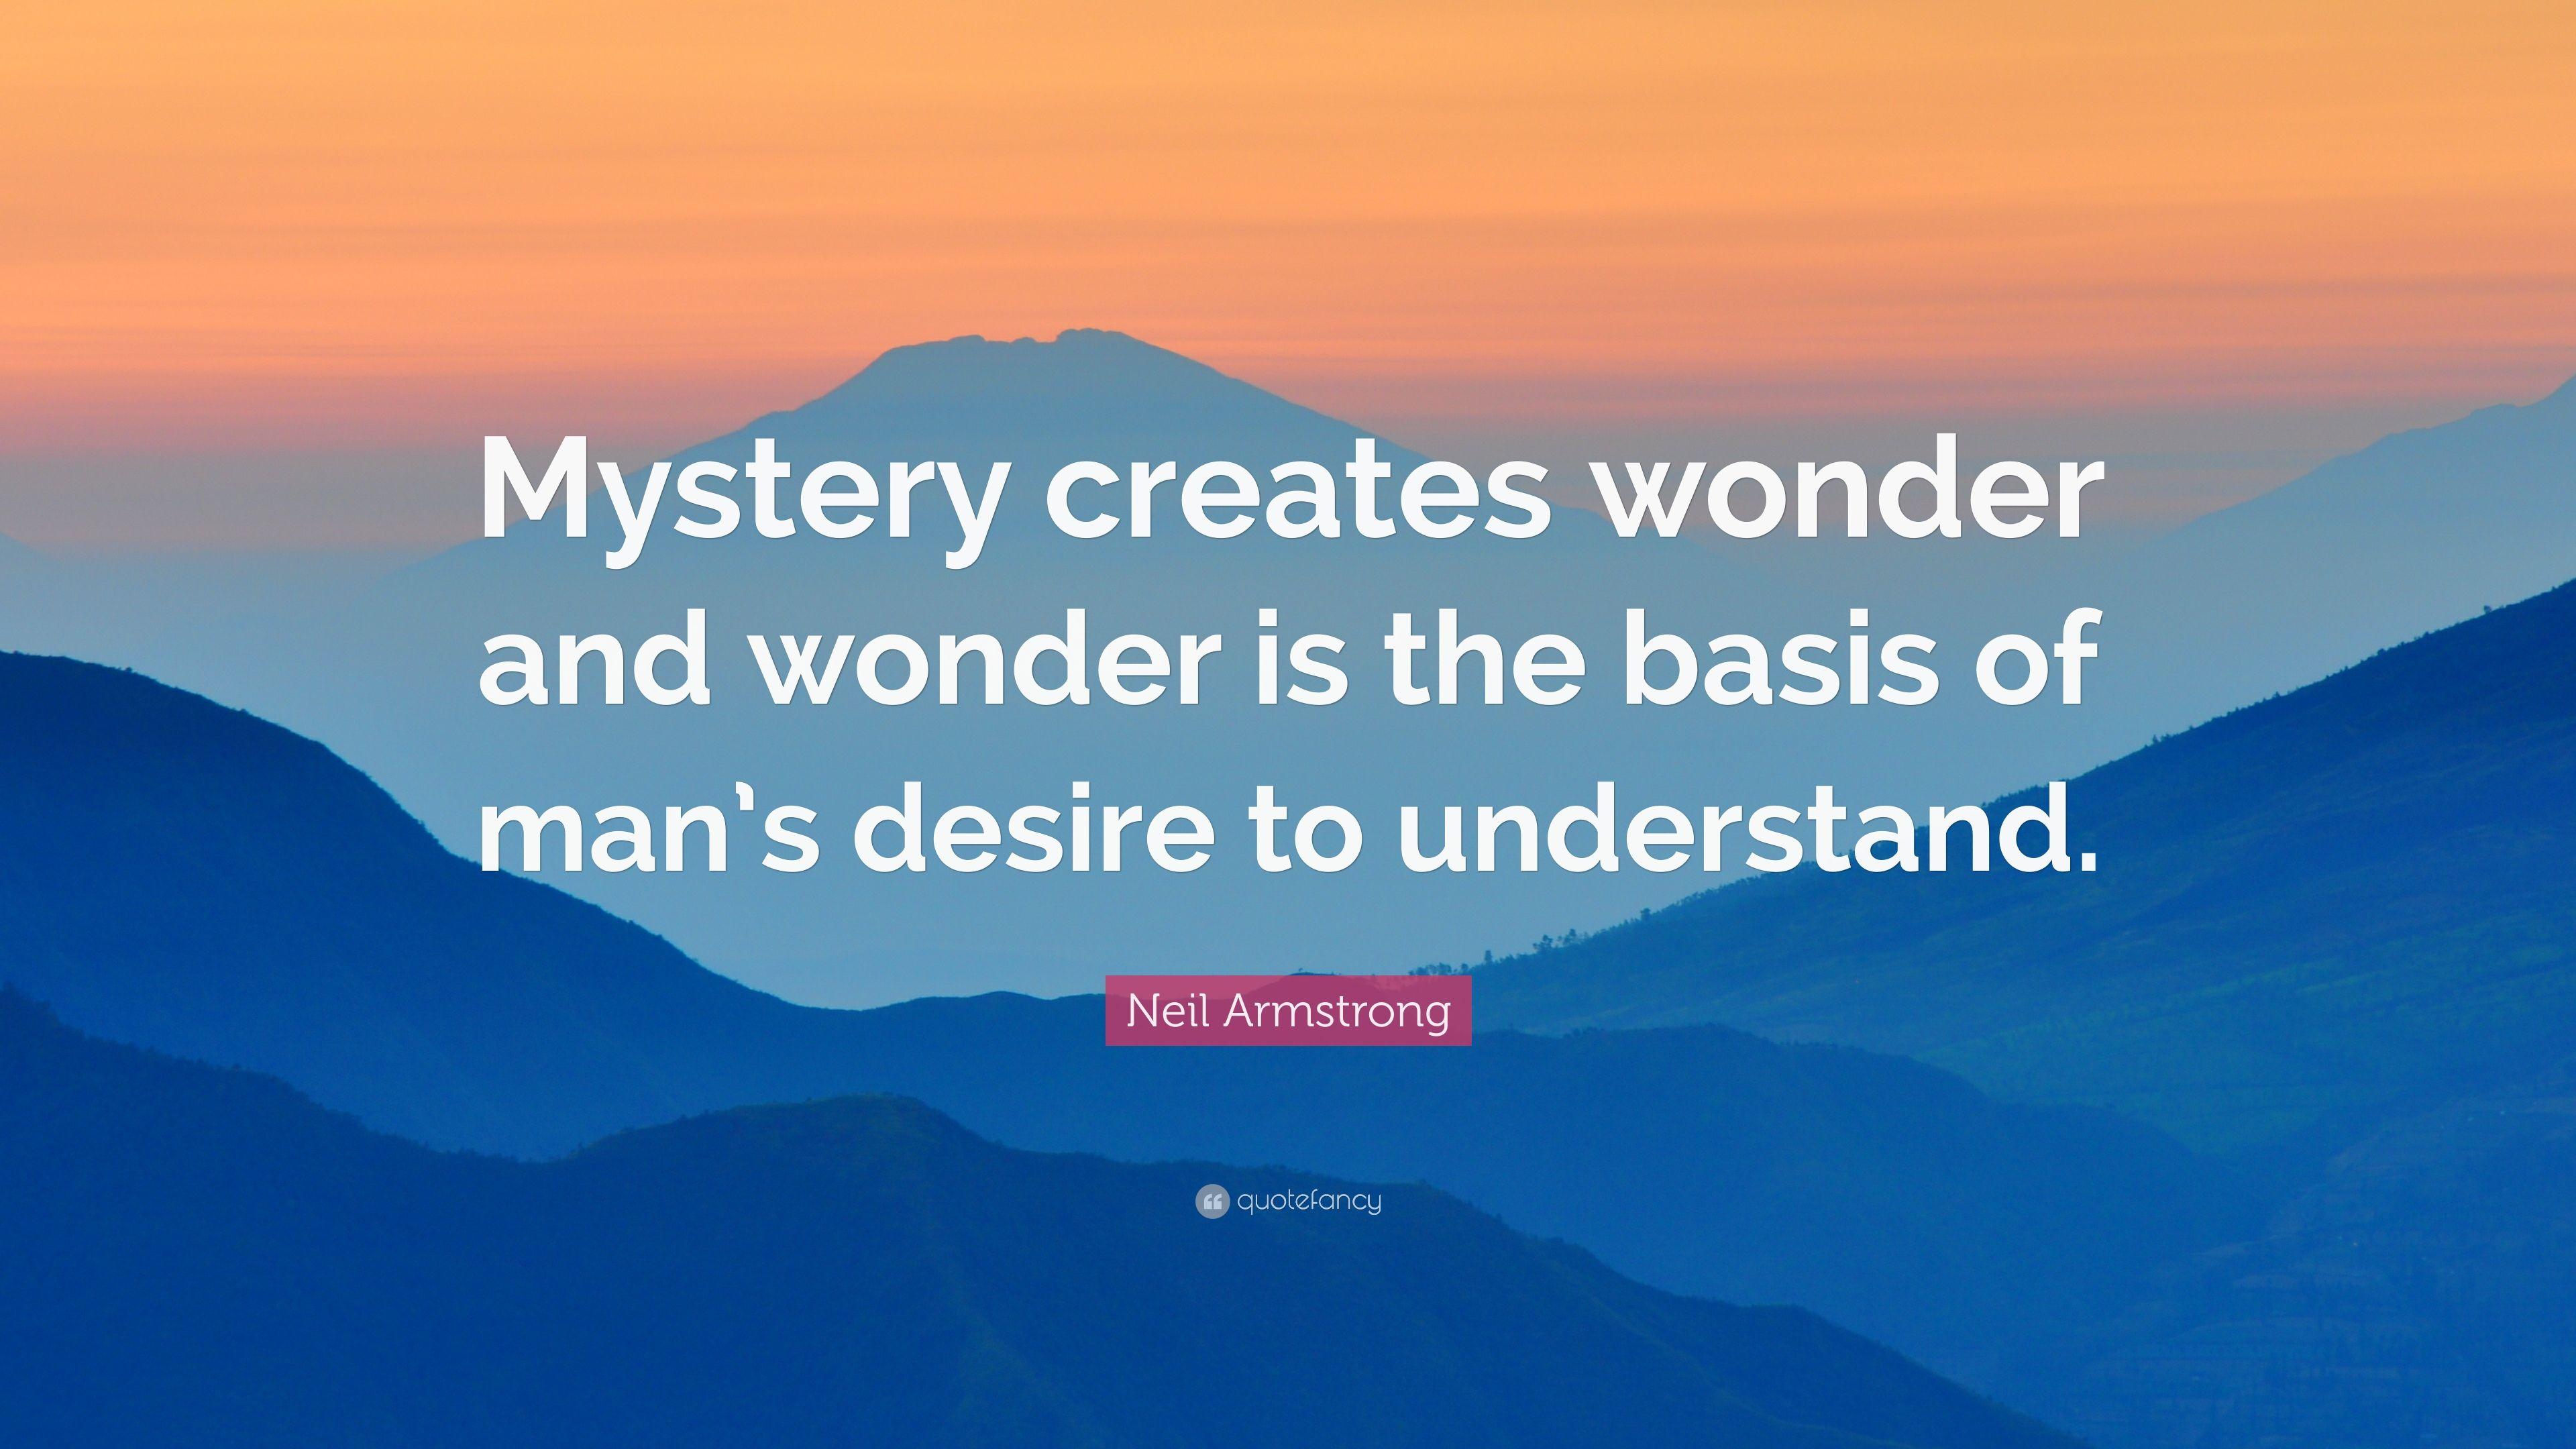 Neil Armstrong Quote: “Mystery creates wonder and wonder is